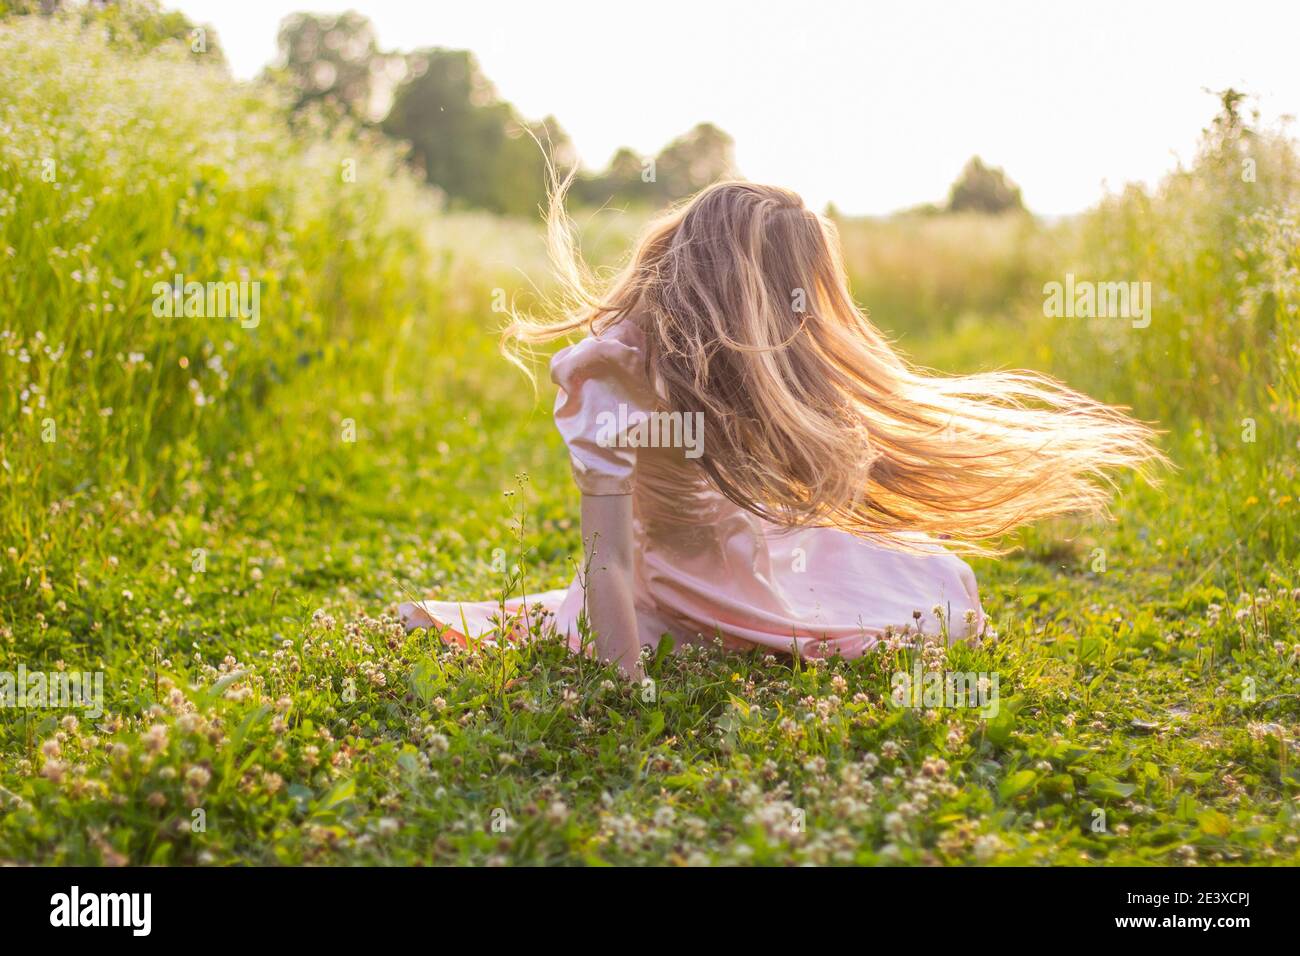 girl sitting in the field in a pink dress Stock Photo